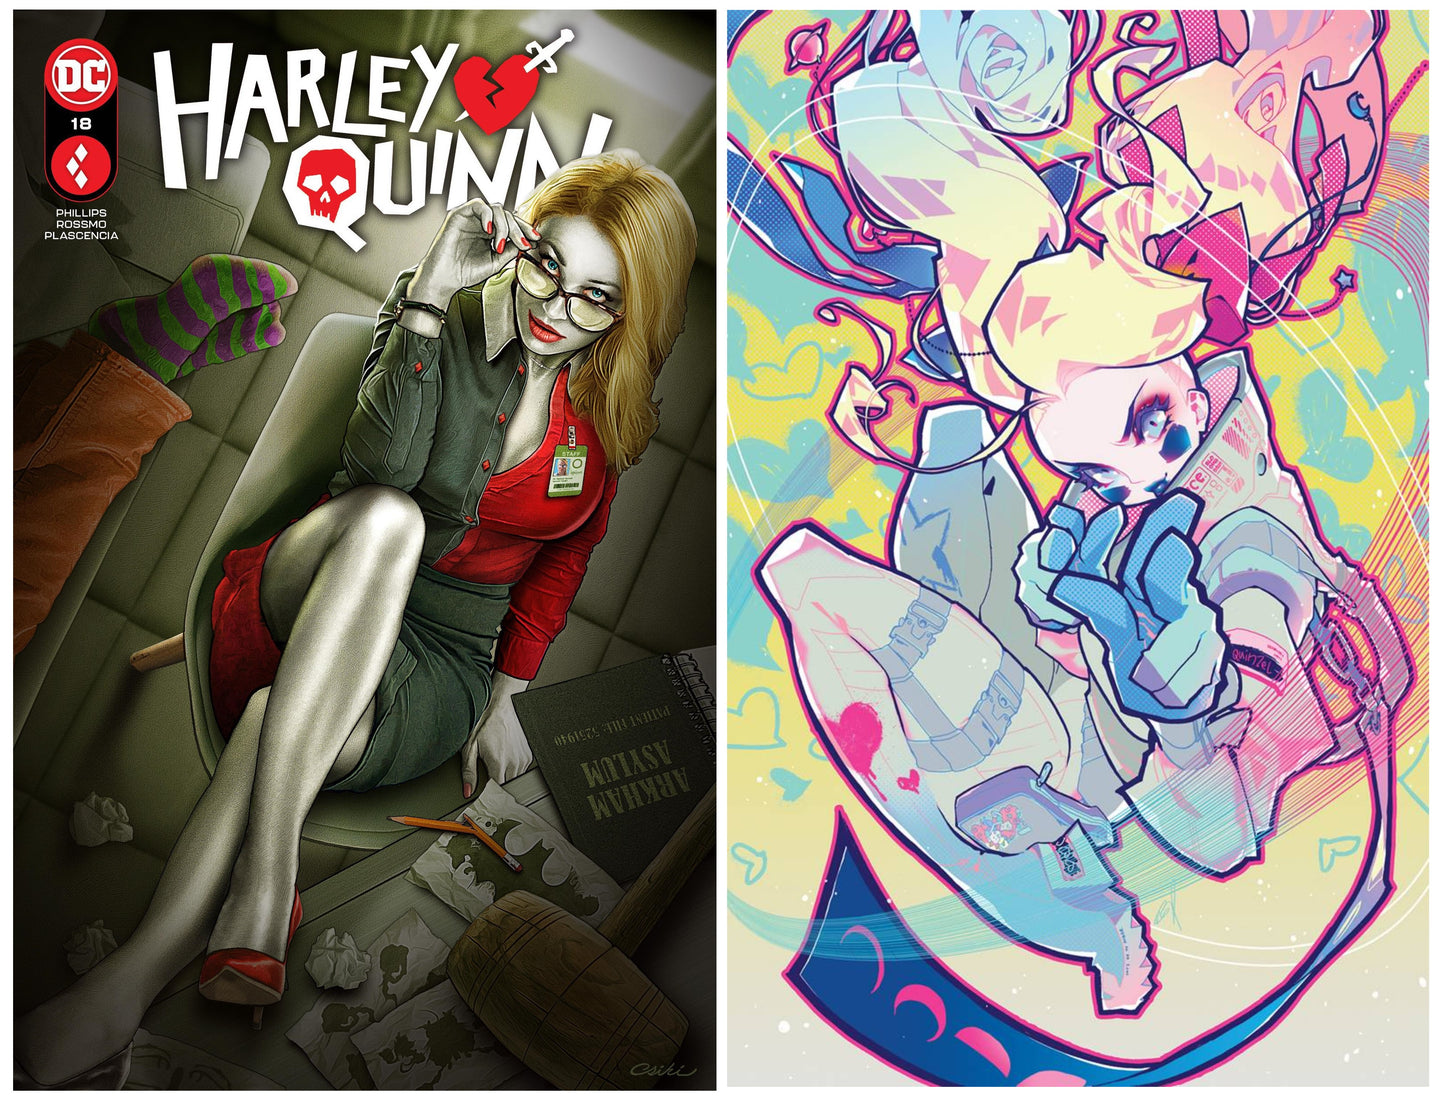 HARLEY QUINN #18 ROB CSIKI VARIANT LIMITED T0 300 COPIES WITH NUMBERED COA & 1:25 ROSE BESCH VARIANT